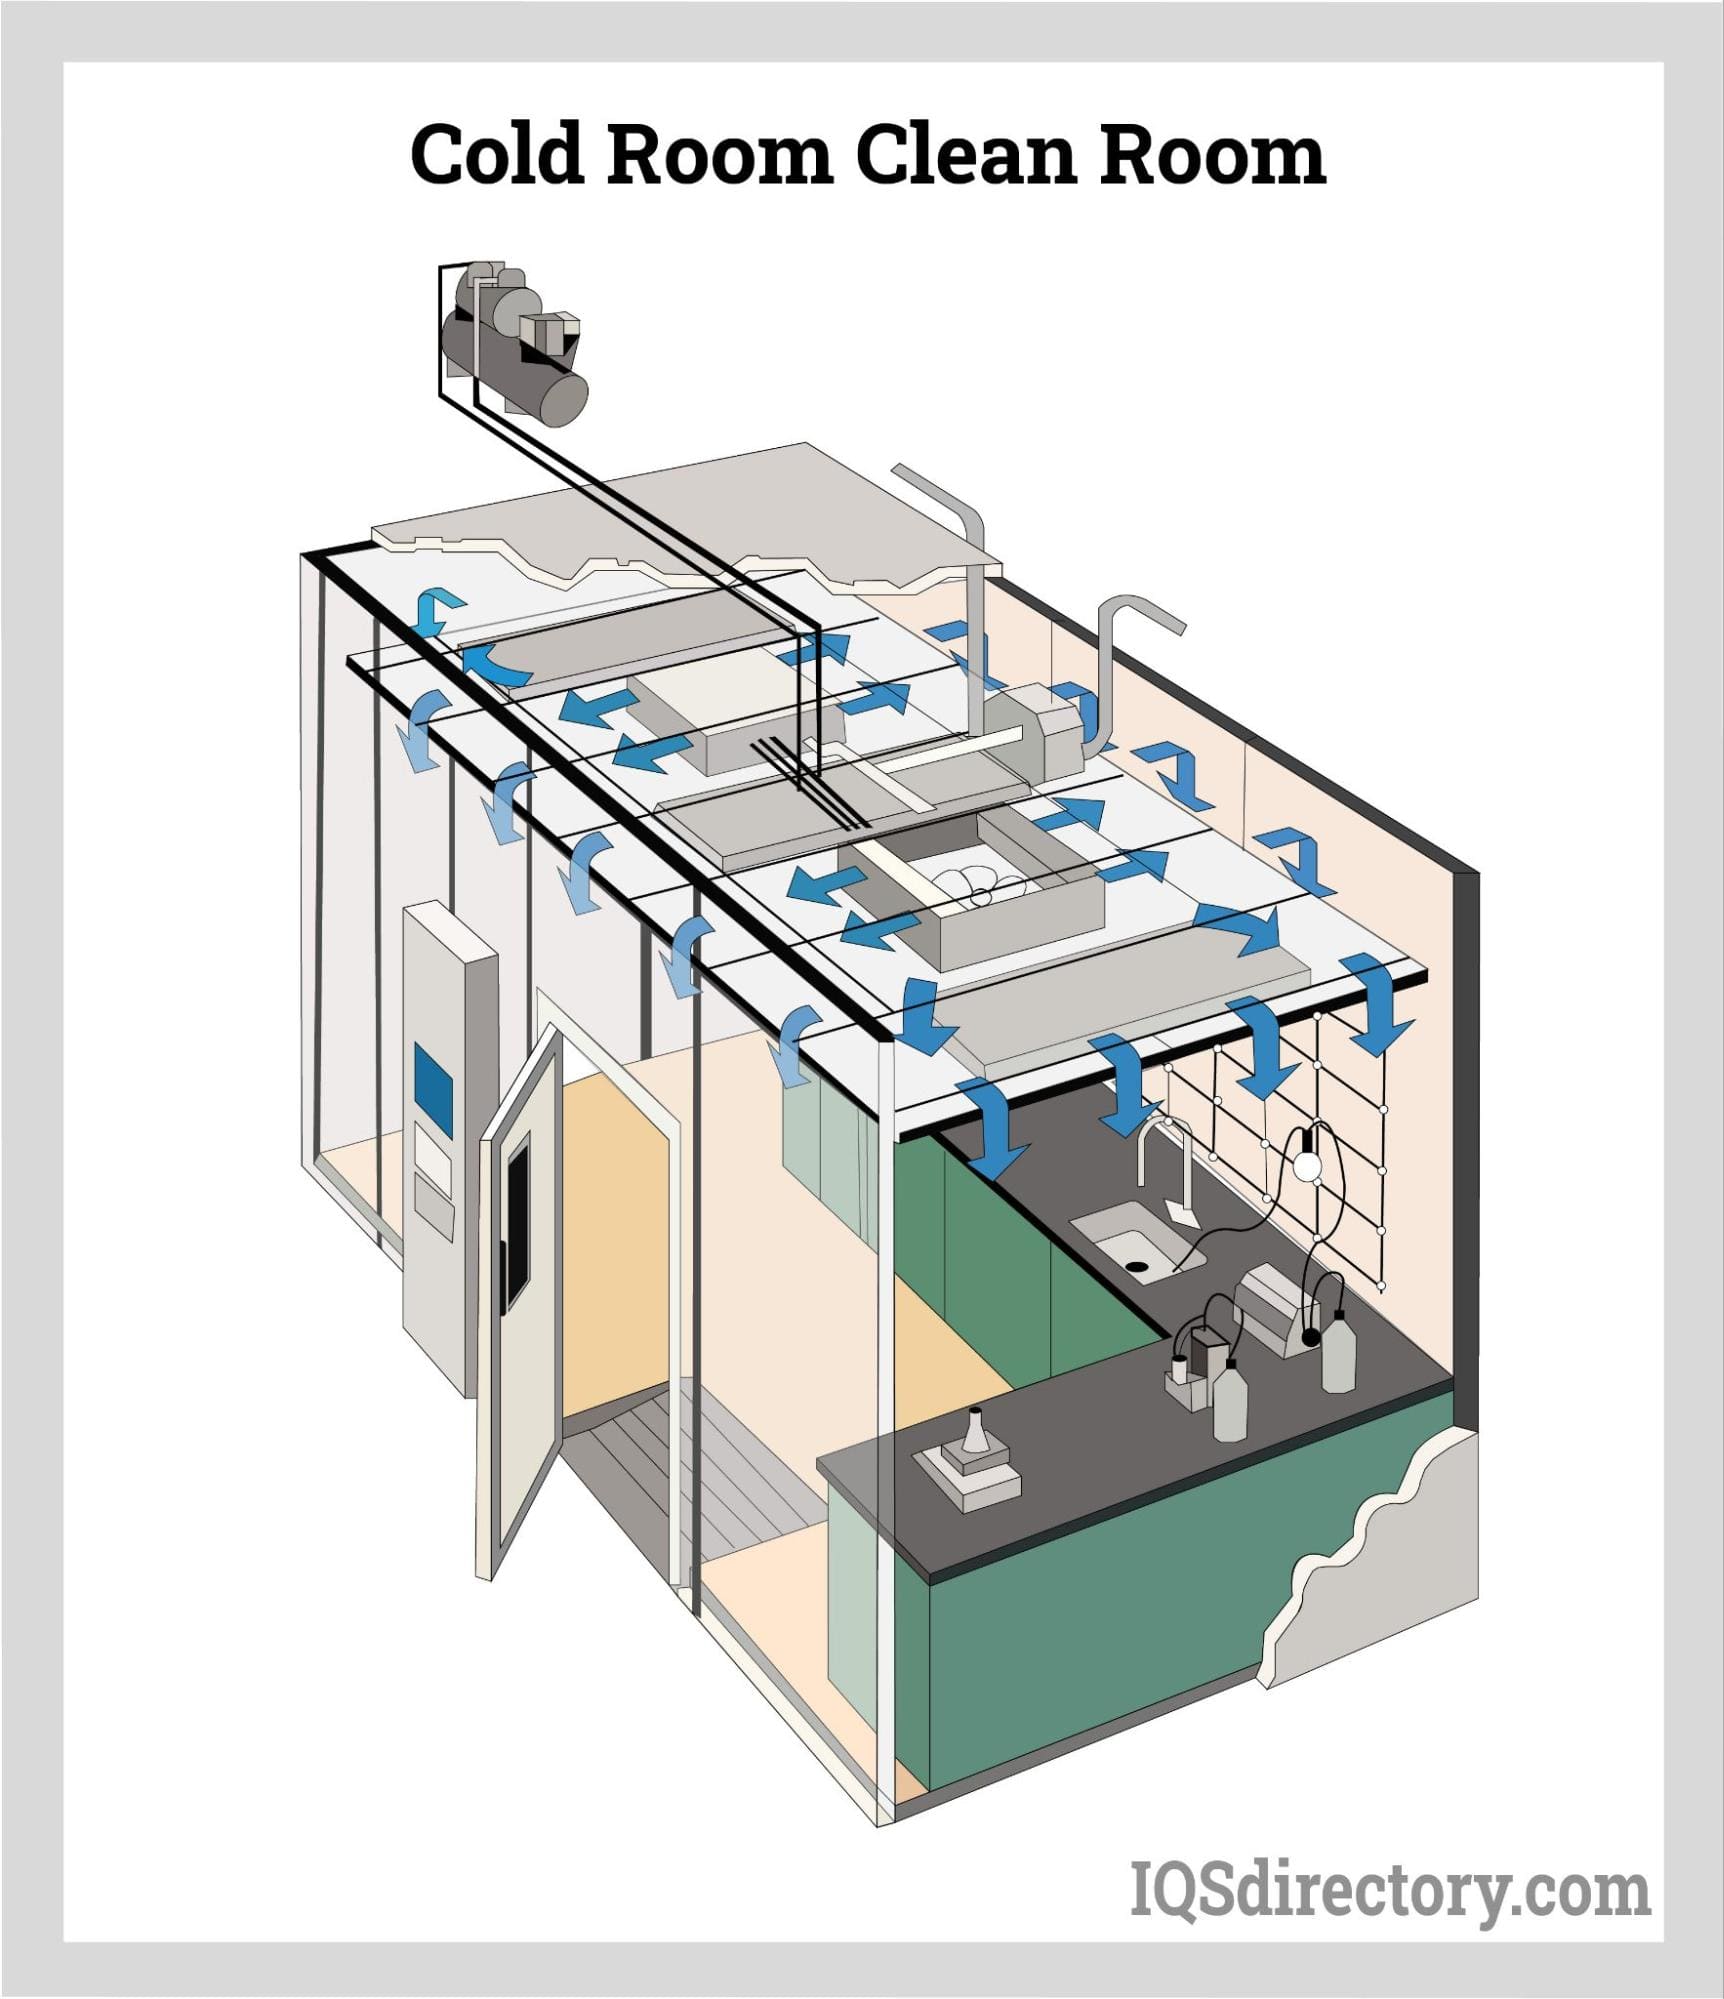 Cold Room Clean Room